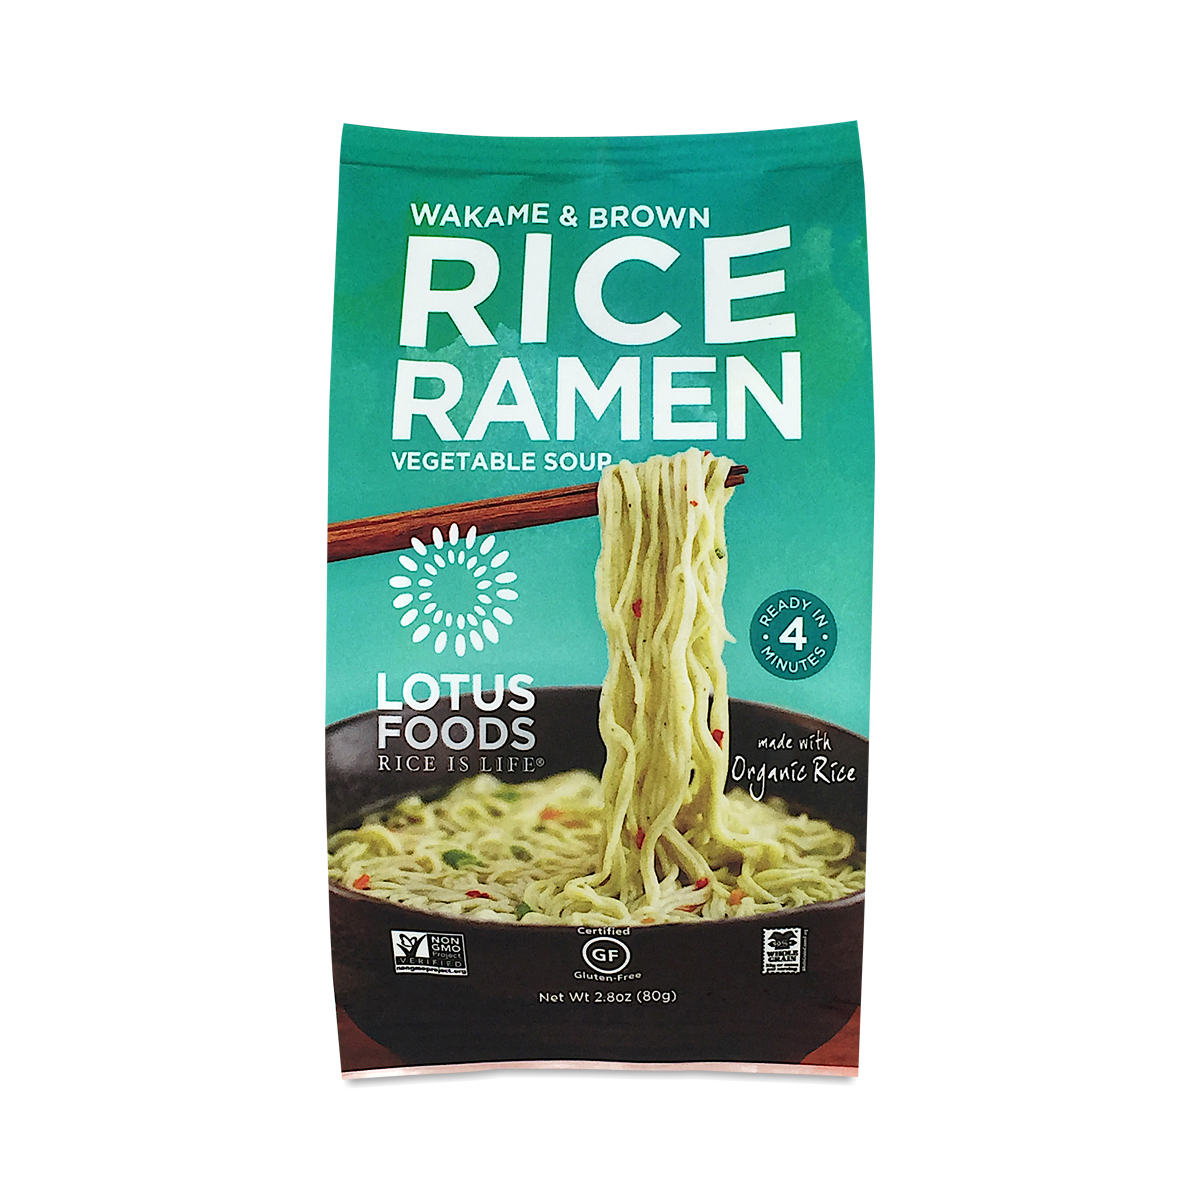 Lotus Foods Wakame & Brown Rice Ramen with Vegetable Broth 2.8 oz pouch